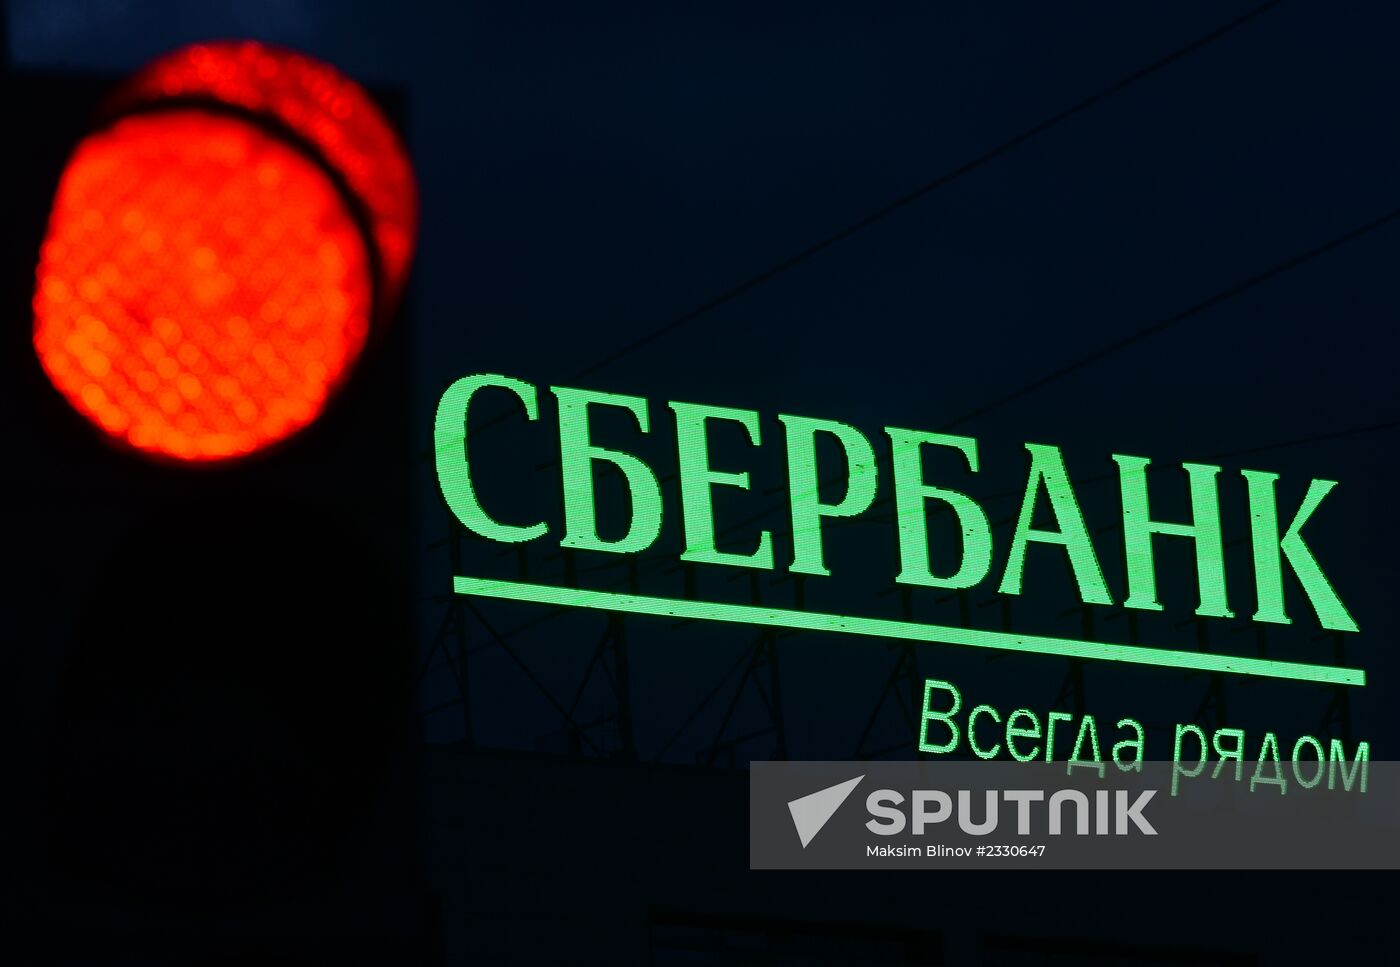 Sberbank office in Moscow